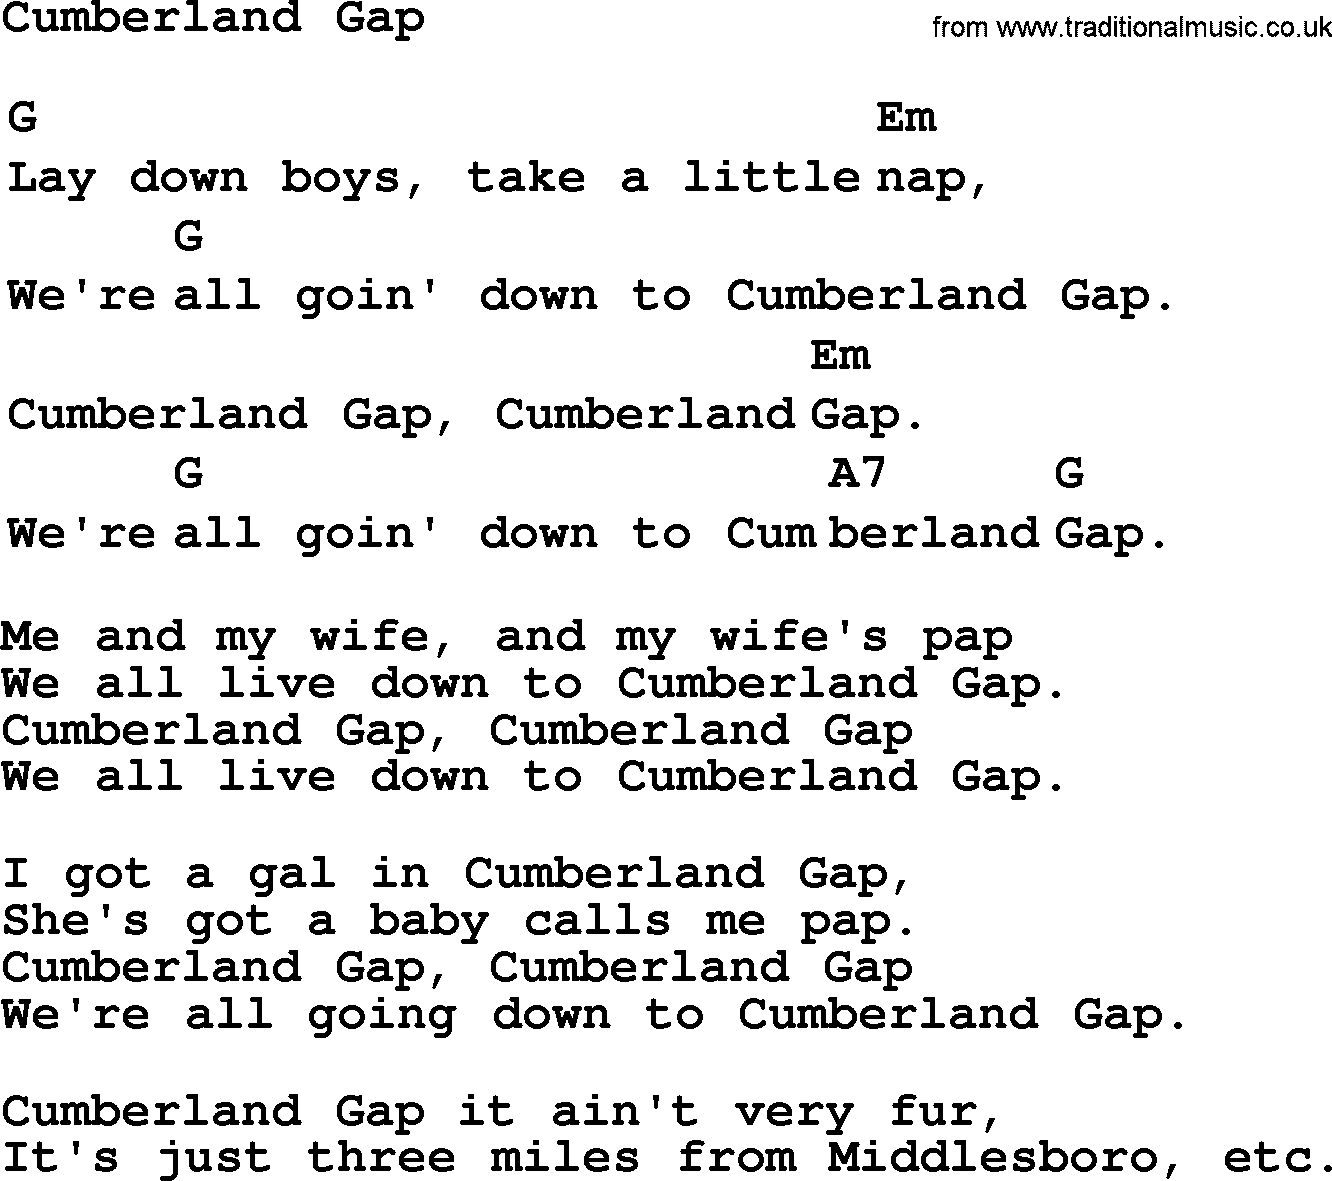 Top 1000 Most Popular Folk and Old-time Songs: Cumberland Gap, lyrics and chords